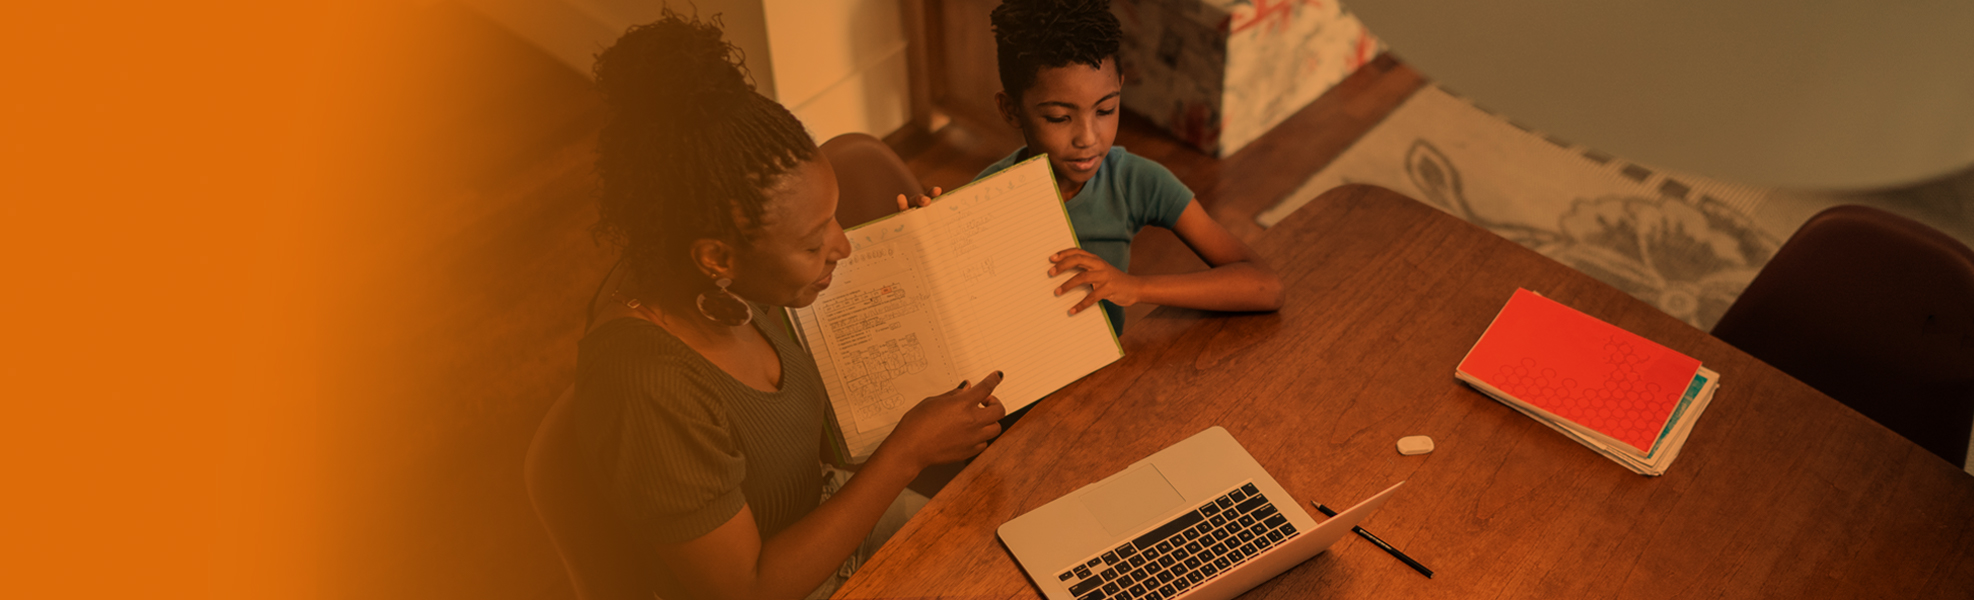 4 Tips for parents EdTech Remote Learning